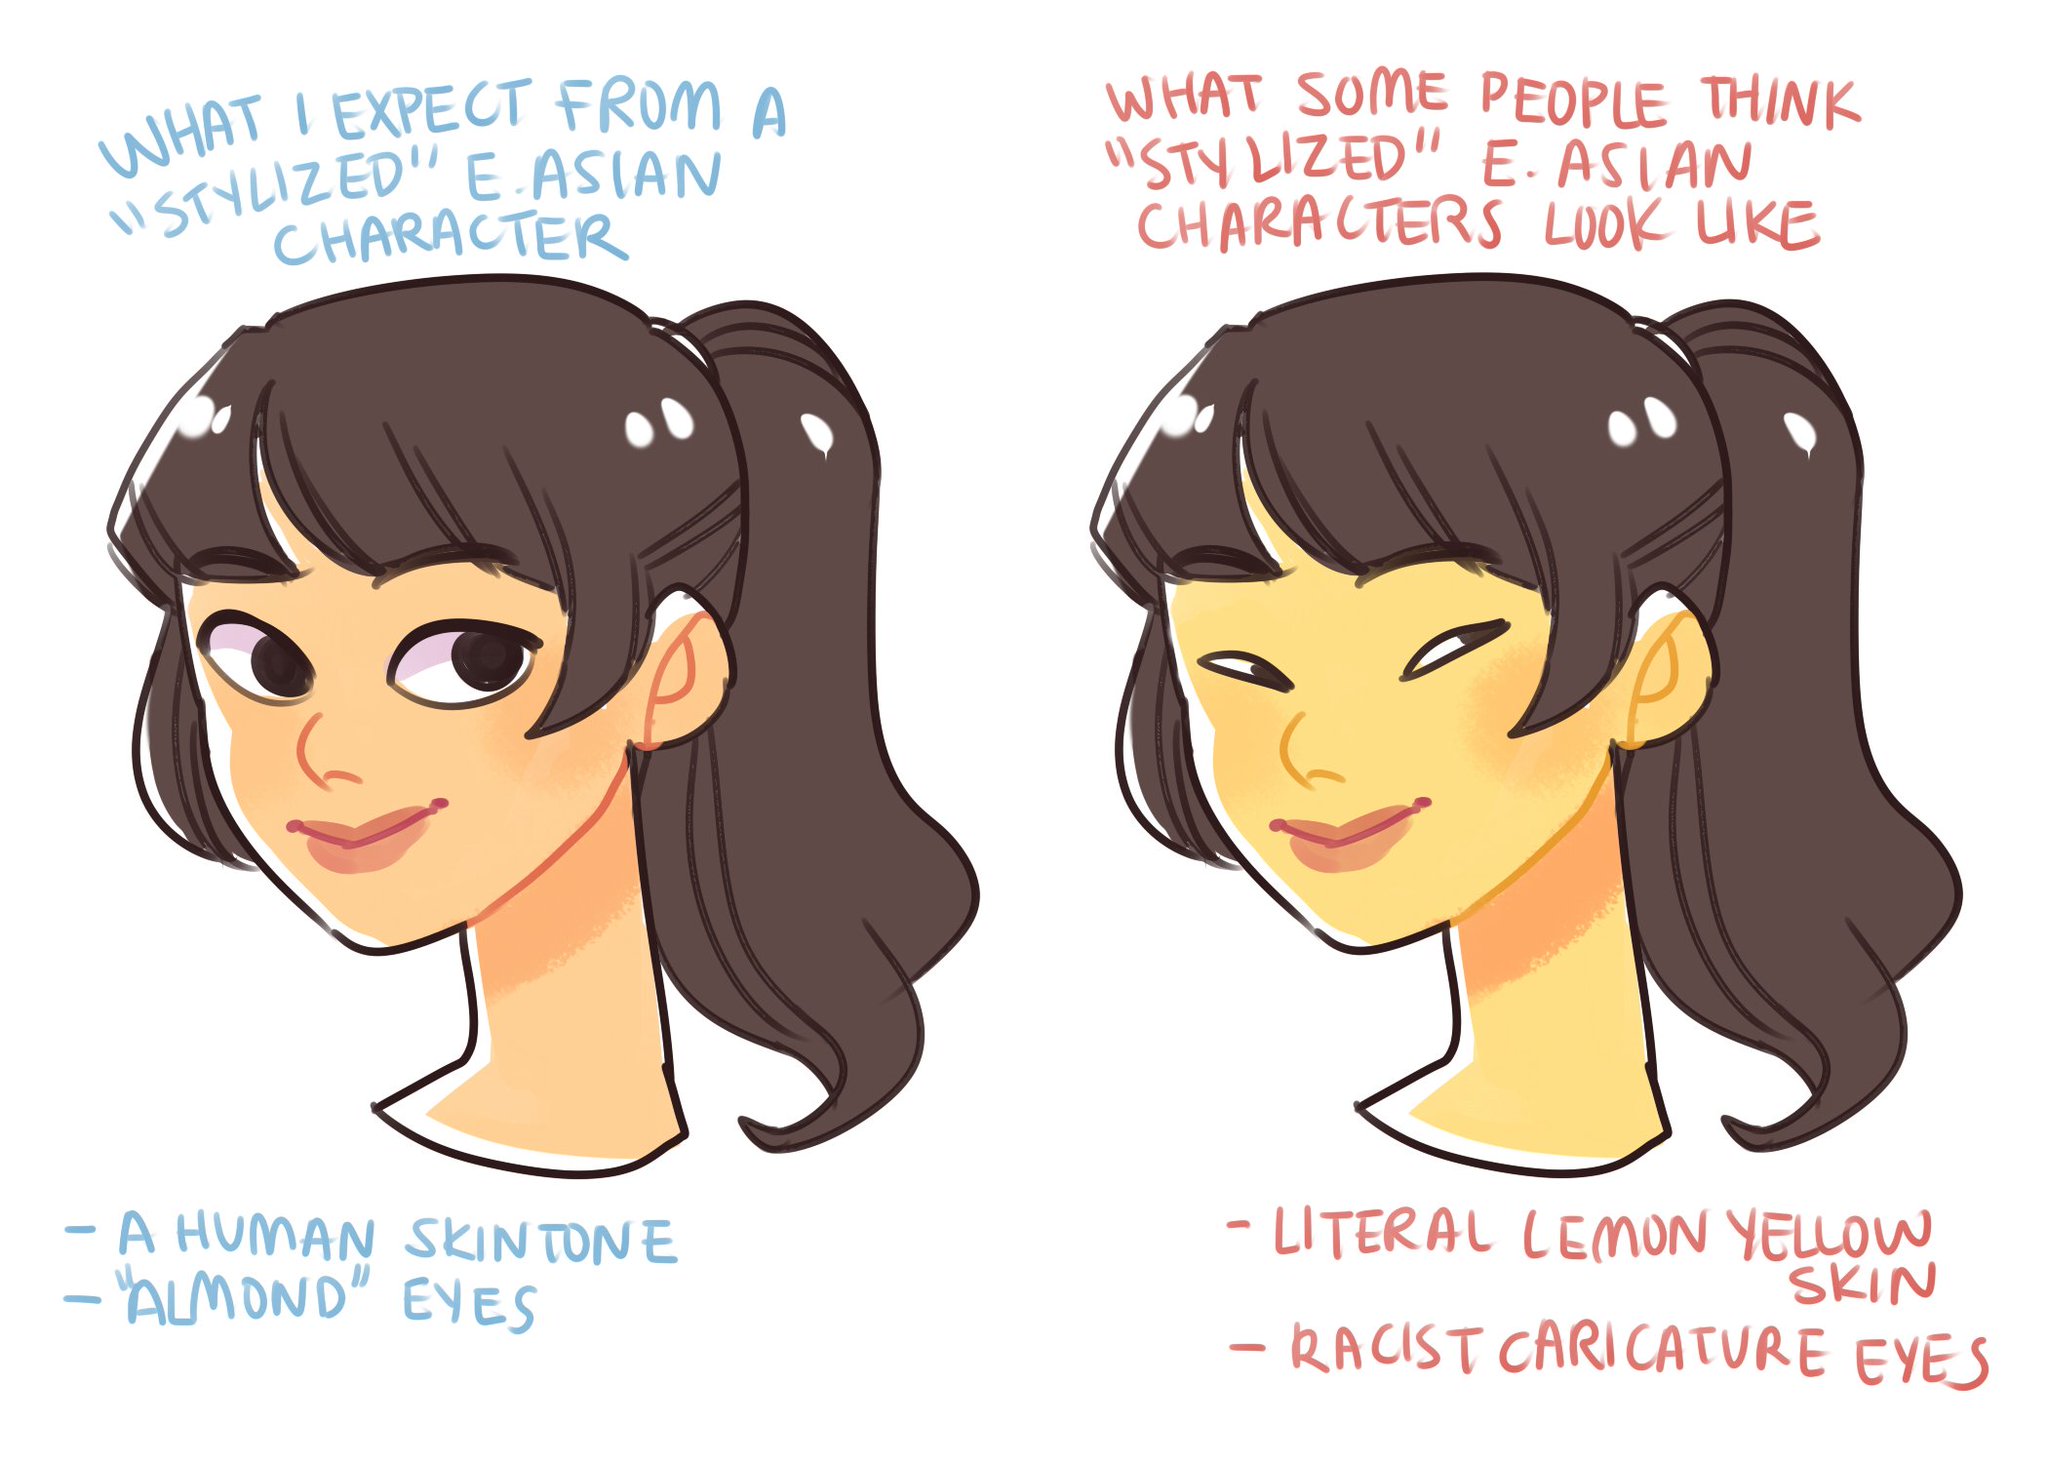 Kat Tsai on Twitter "Drawing East Asian faces, part 2 of 2…